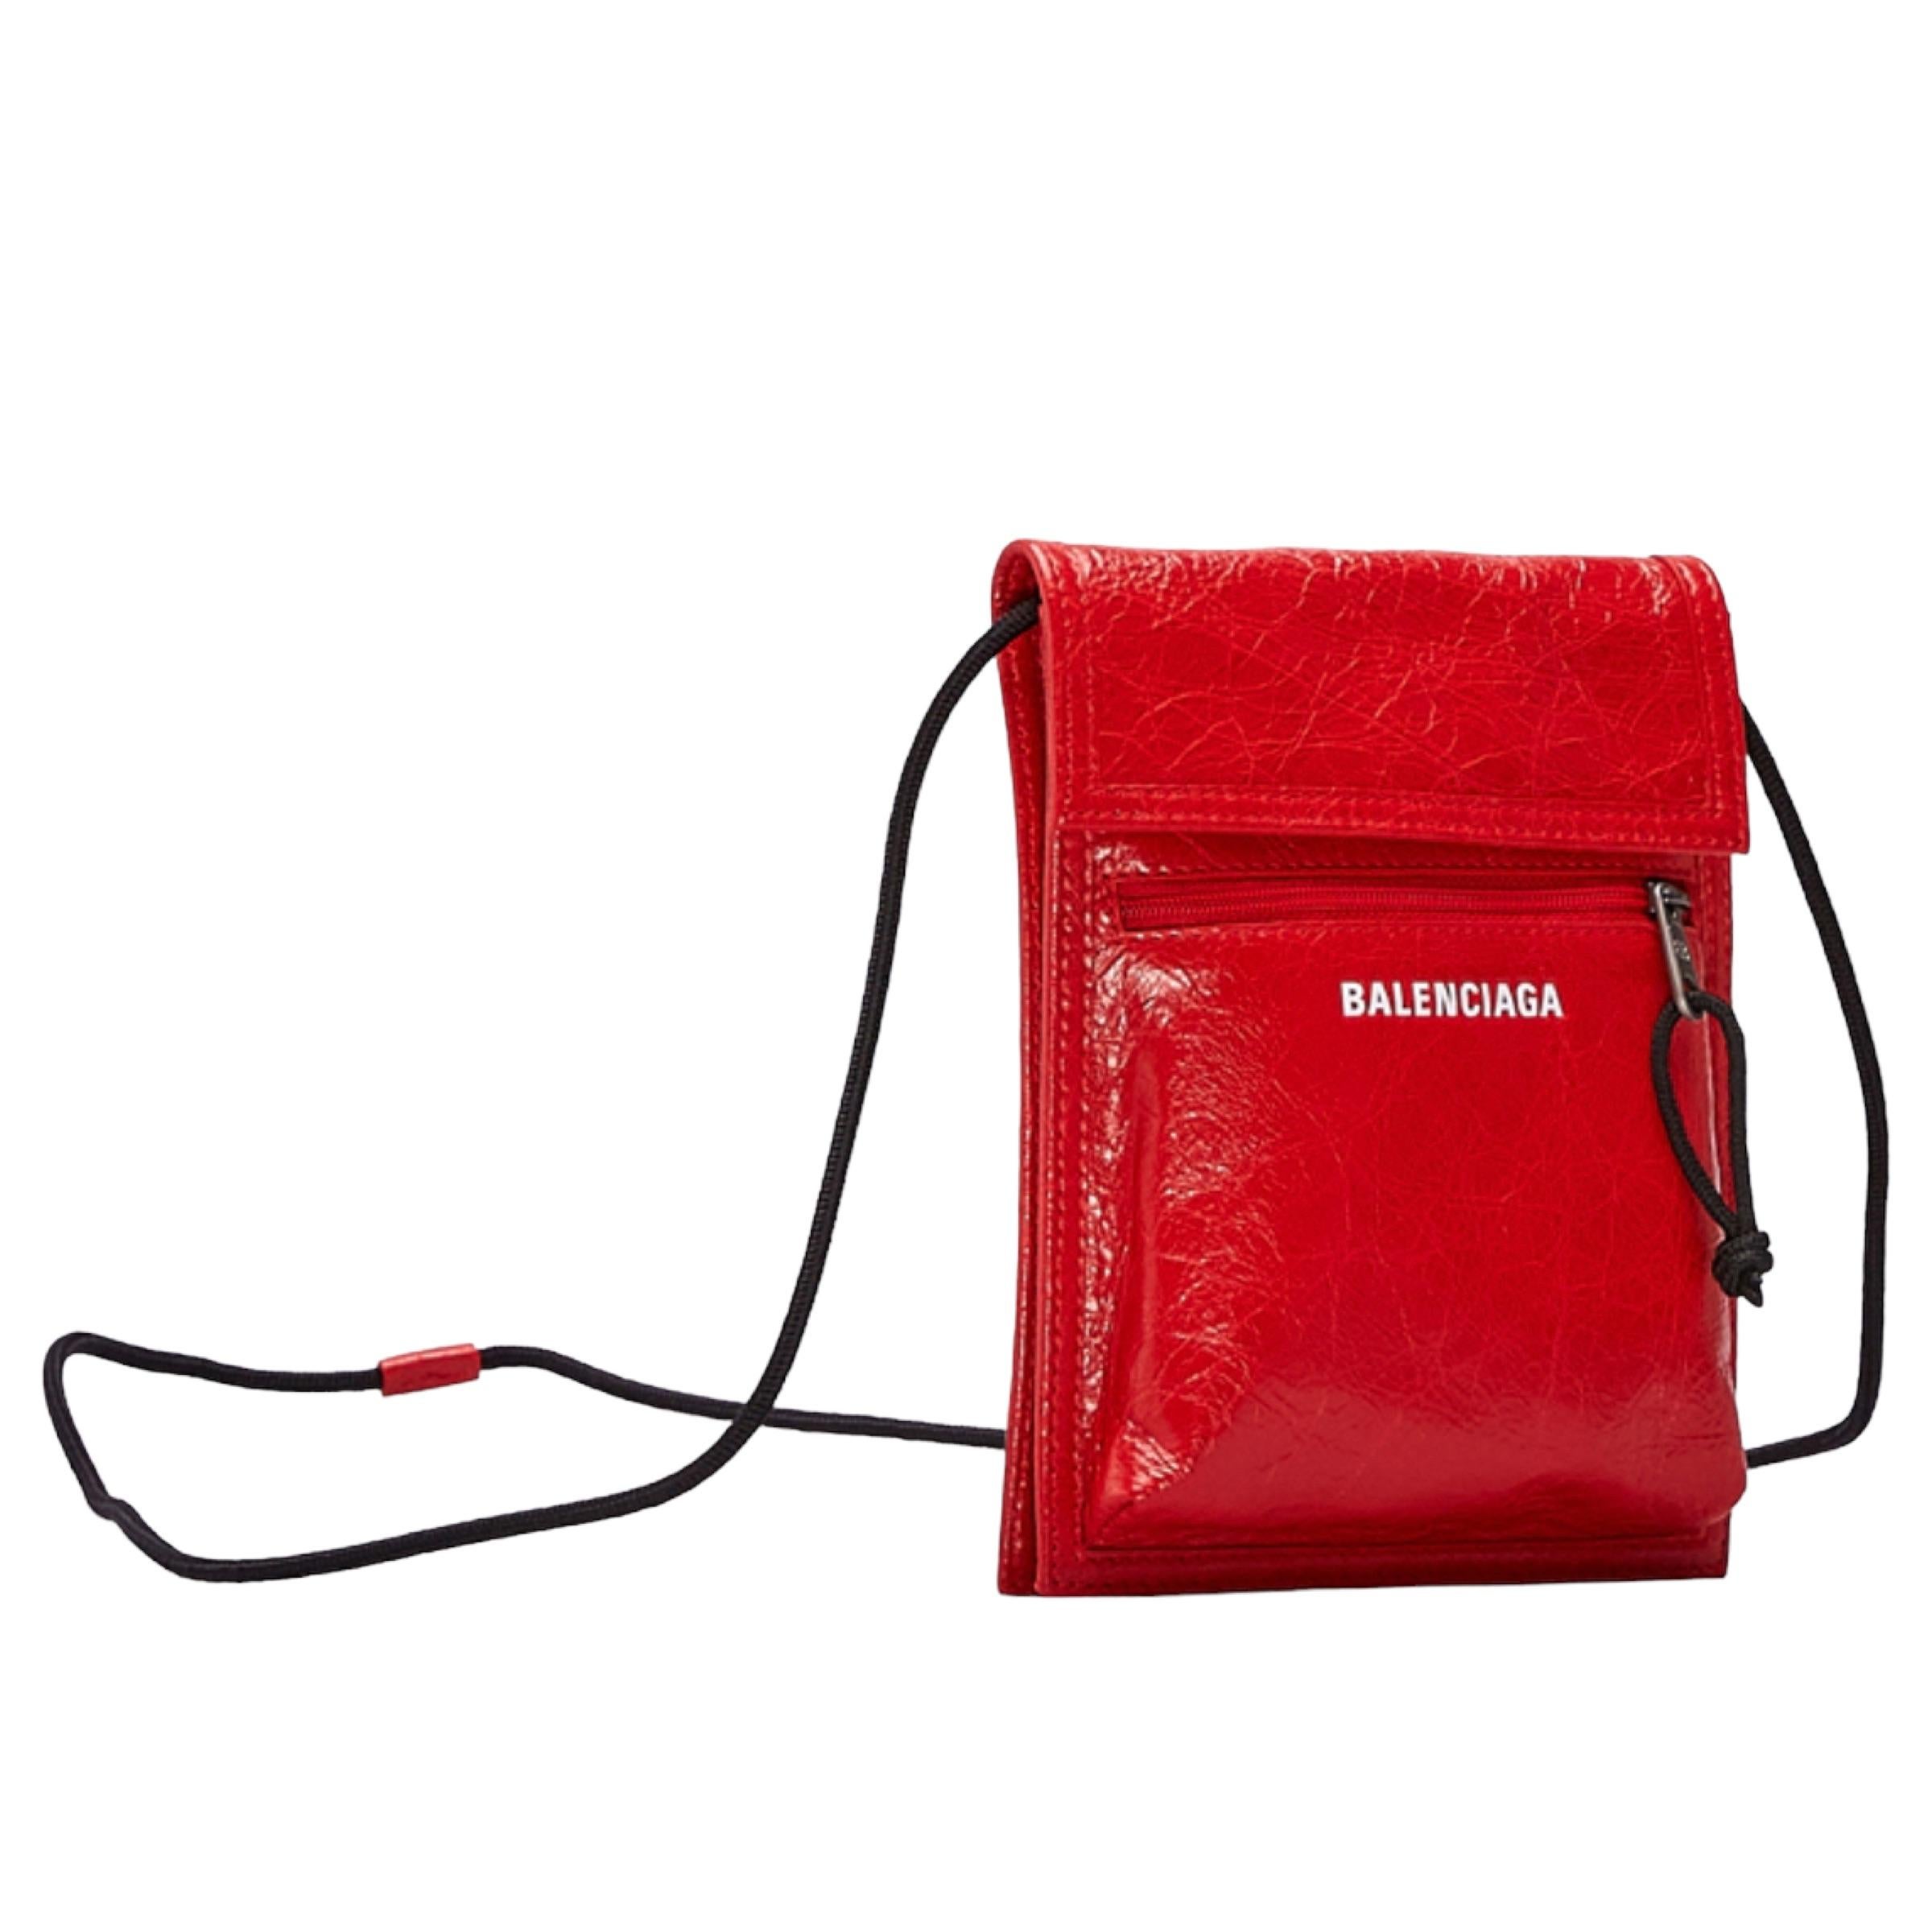 NEW Balenciaga Red Explorer Cracked Leather Pouch Crossbody Bag For Sale 1